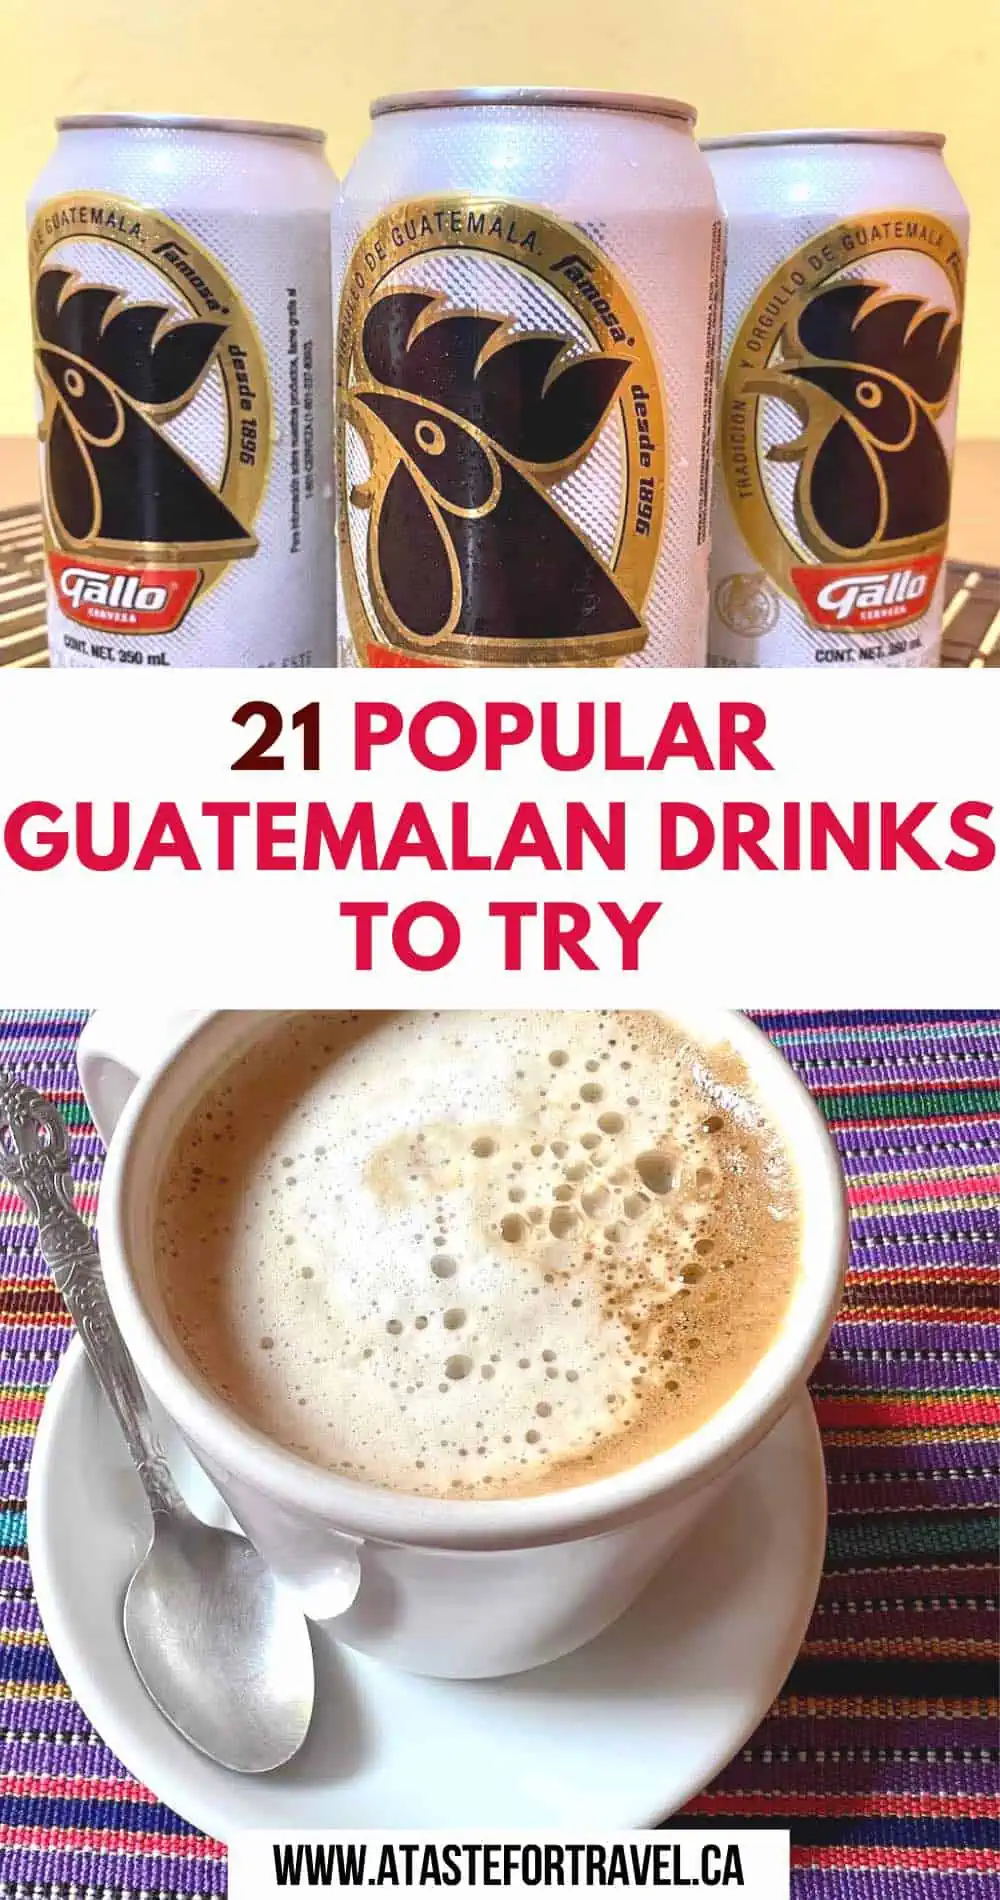 A collage of Guatemalan drinks including Gallo beer and coffee. 